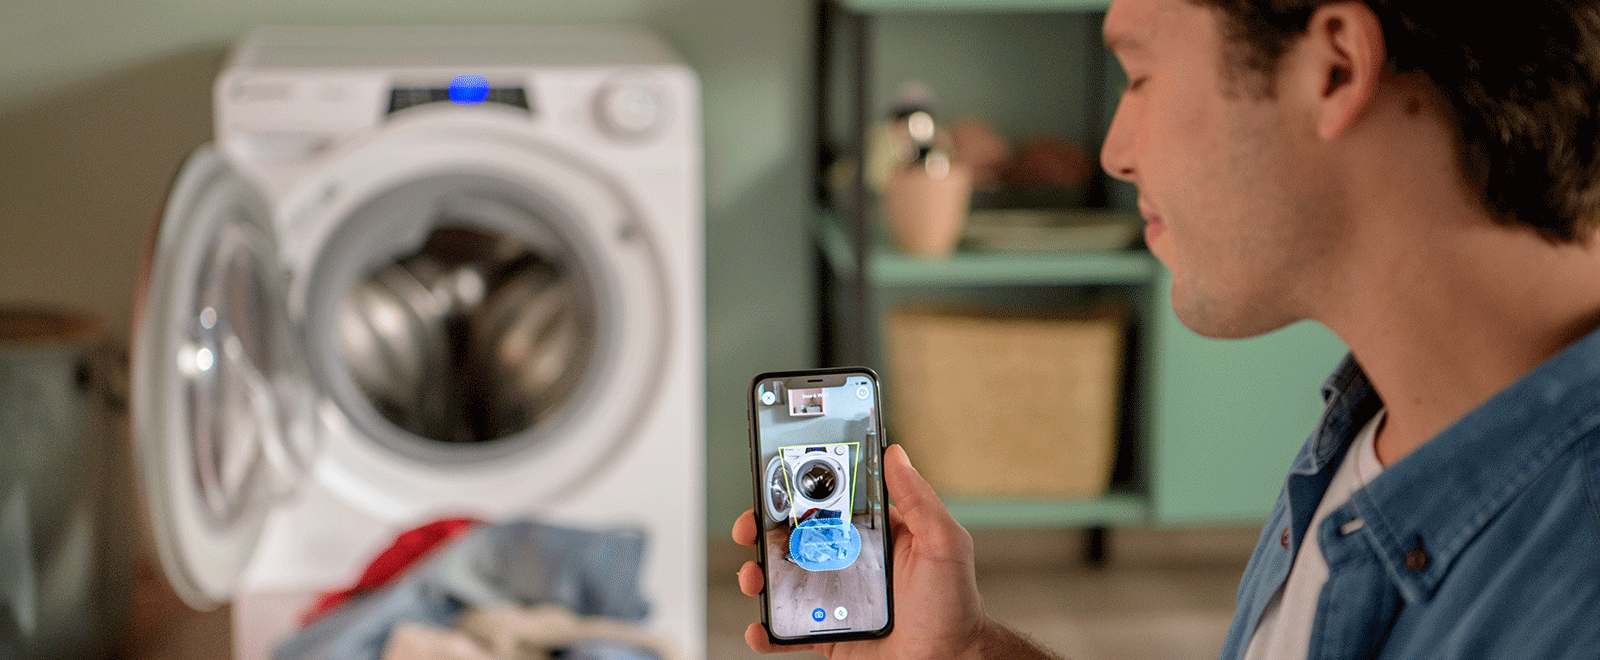 Are you using your washing machine or washer dryer fully?